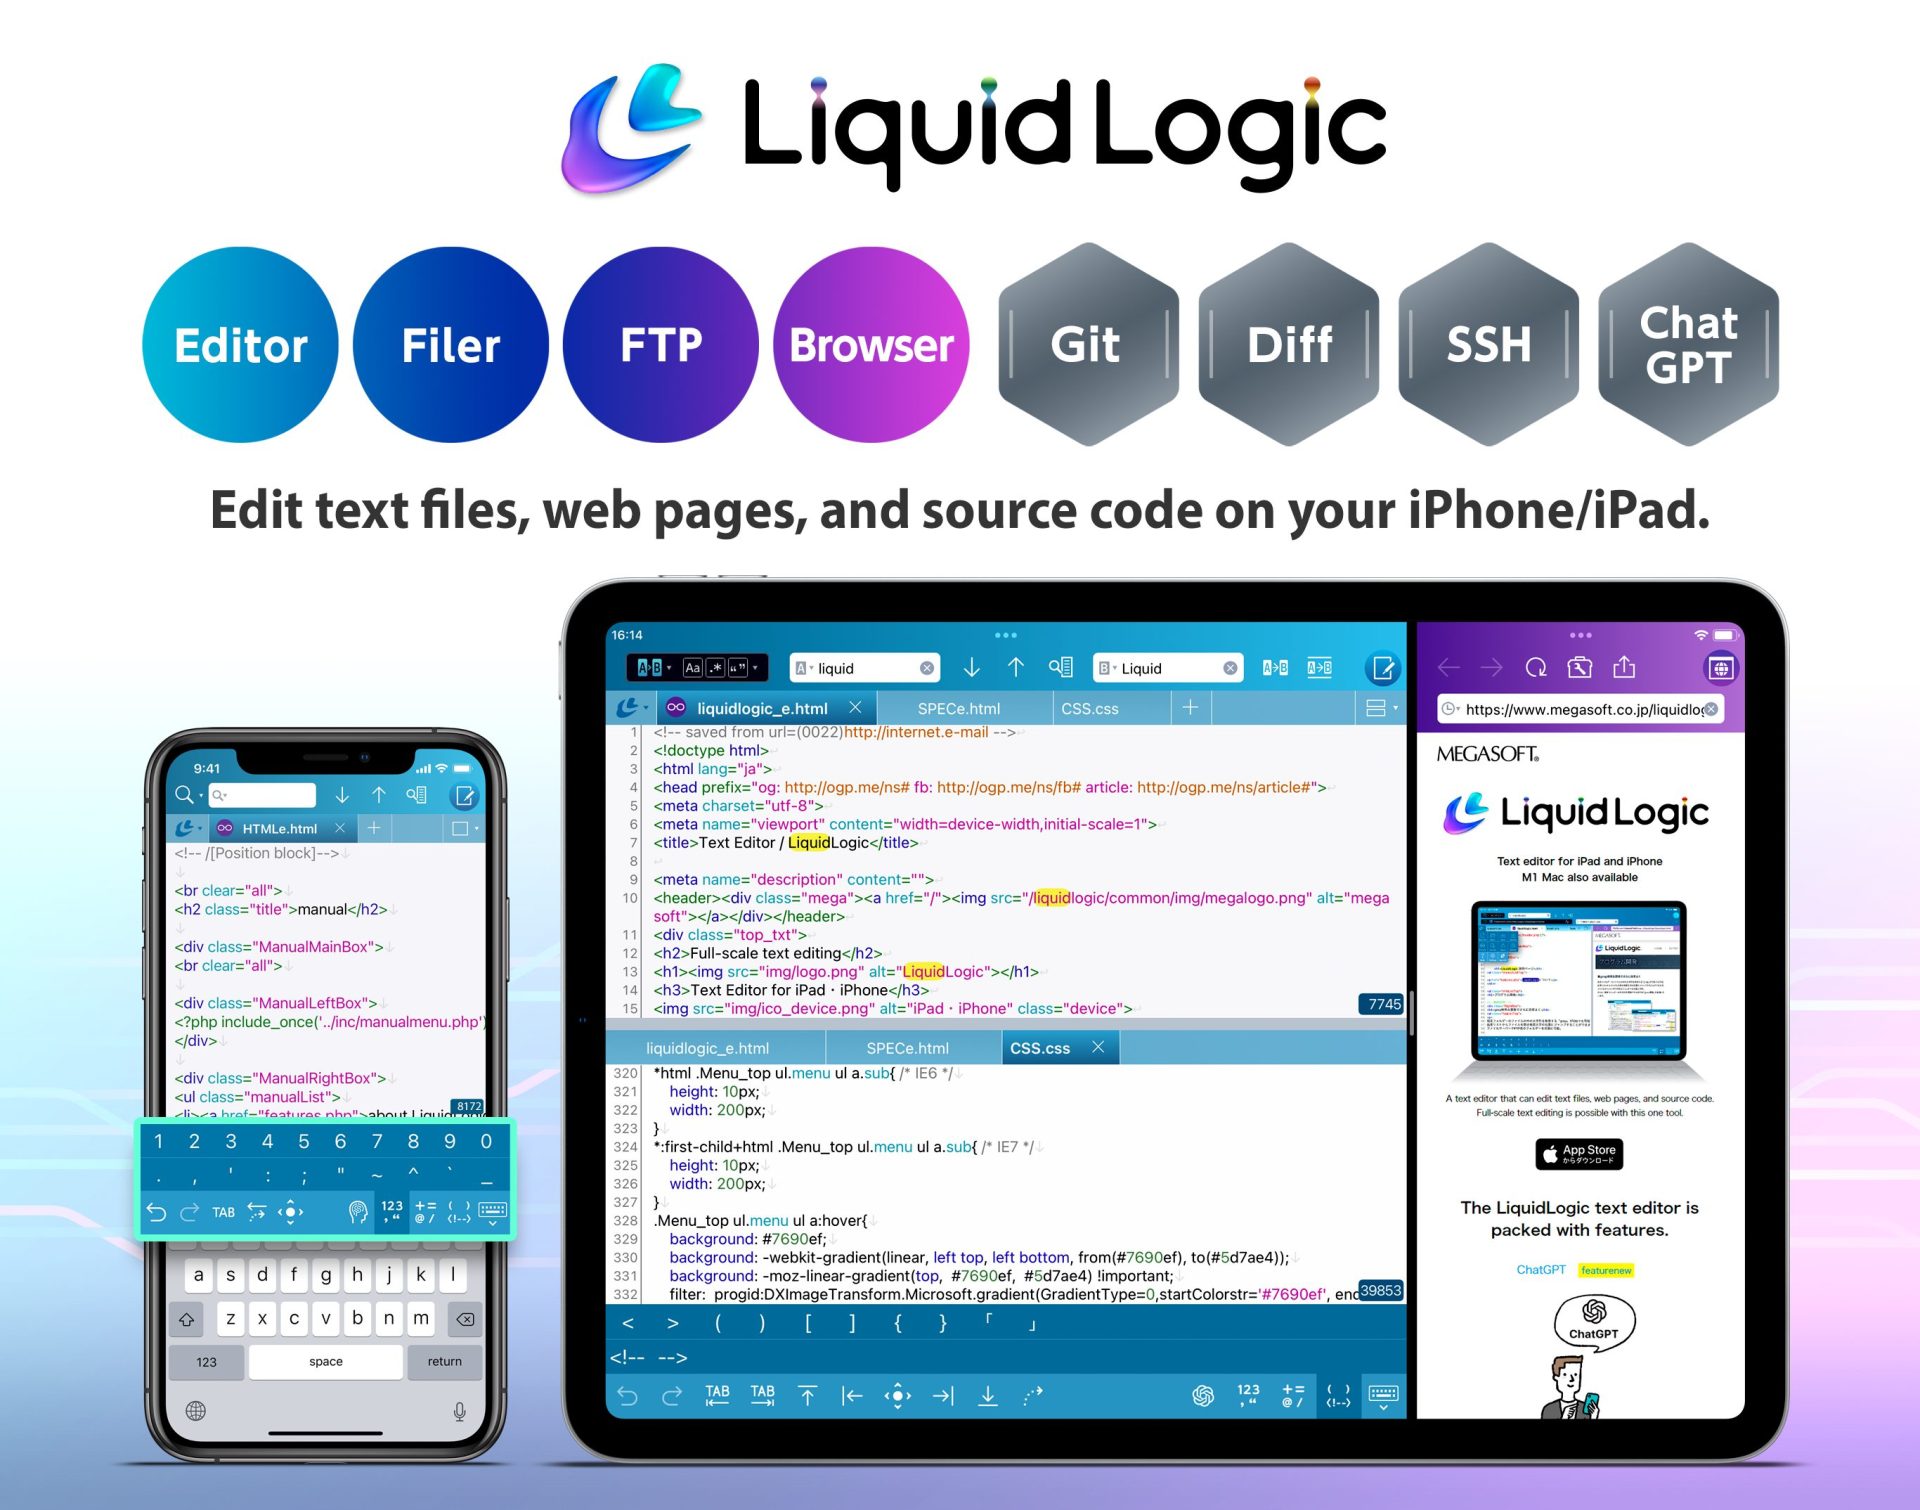 MEGASOFT Inc. released LiquidLogic, a full-fledged iOS text editor for daily note-taking, app development and web editing, on the App Store on May 8, 2024 (Wednesday).